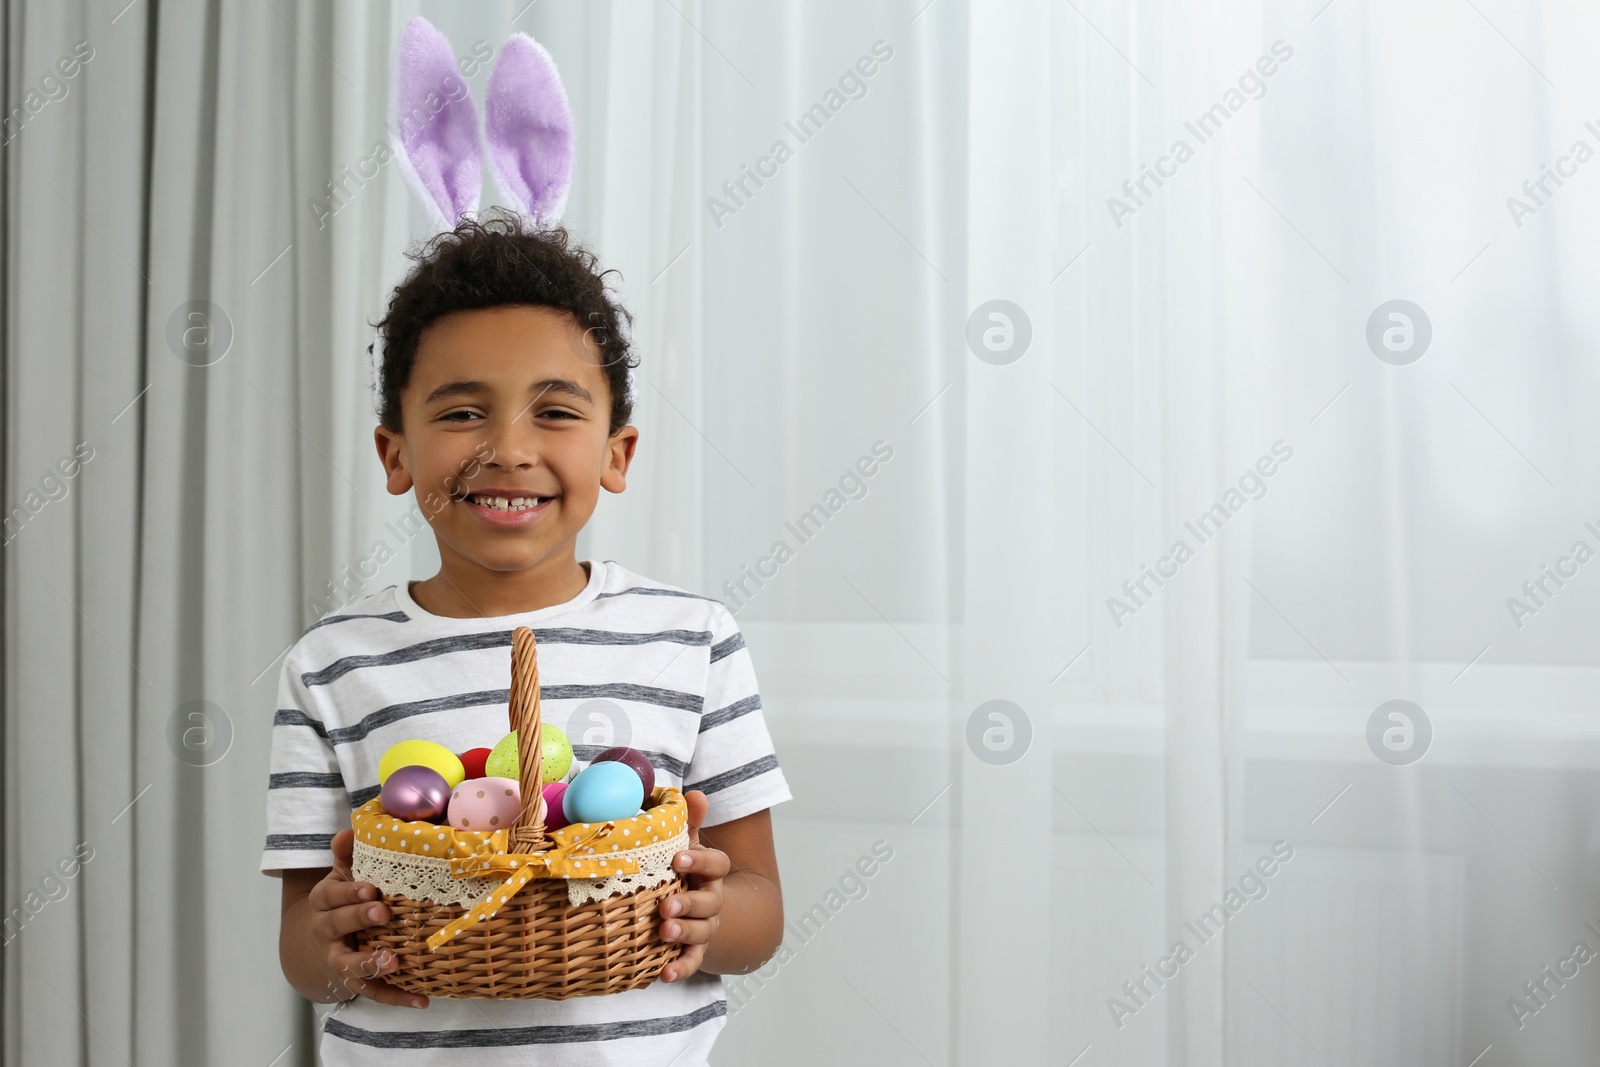 Photo of Cute African American boy in bunny ears headband holding wicker basket with Easter eggs indoors, space for text